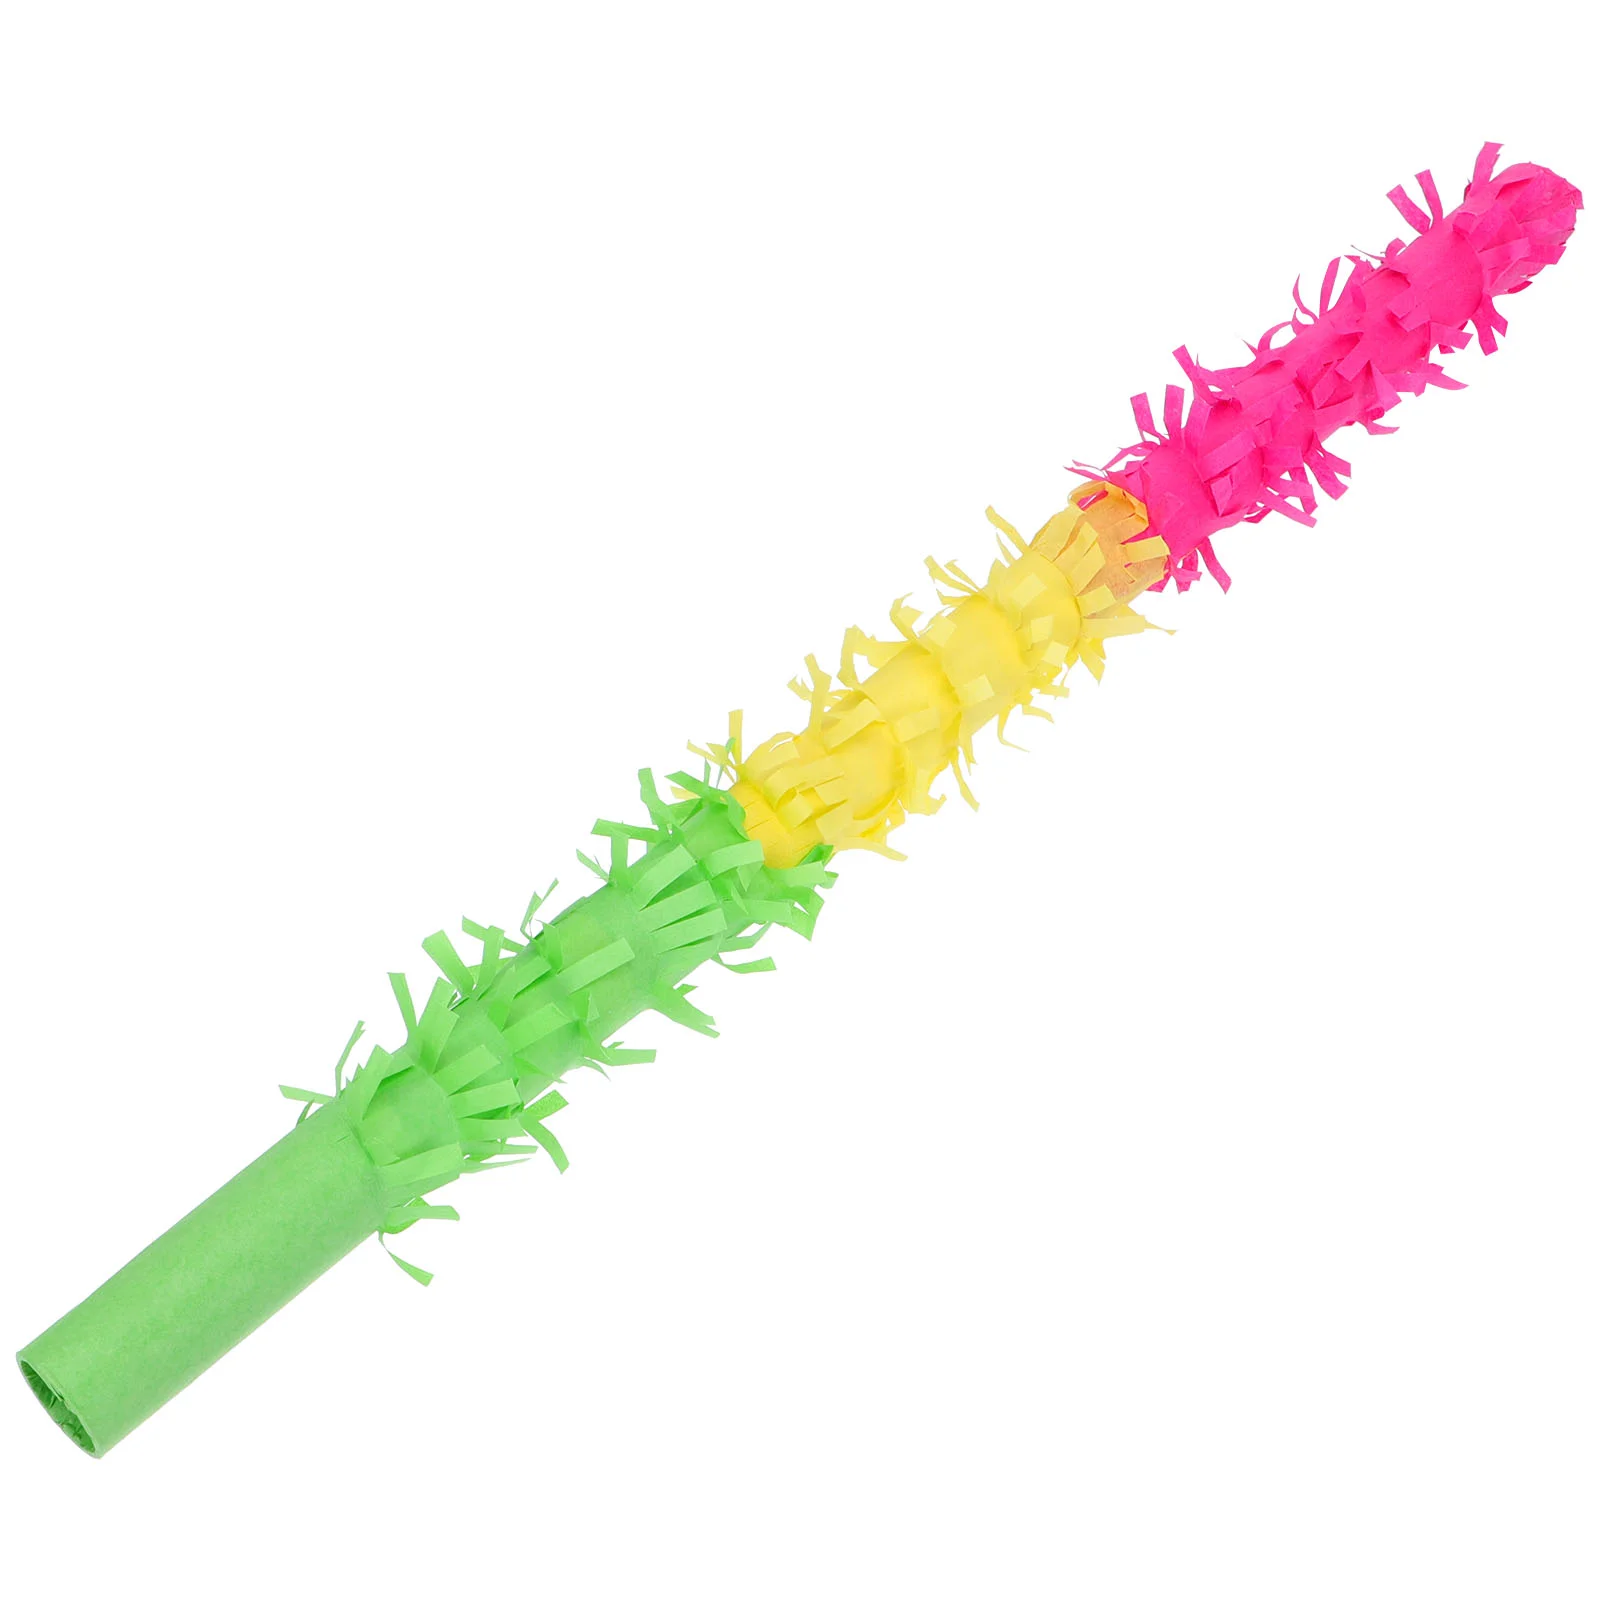 

Pinata Party Stick Noisemakers Birthday Sticks Supplies Paper Cheering Bat Candy Fringe Toy Decorations Shower Baby Favors